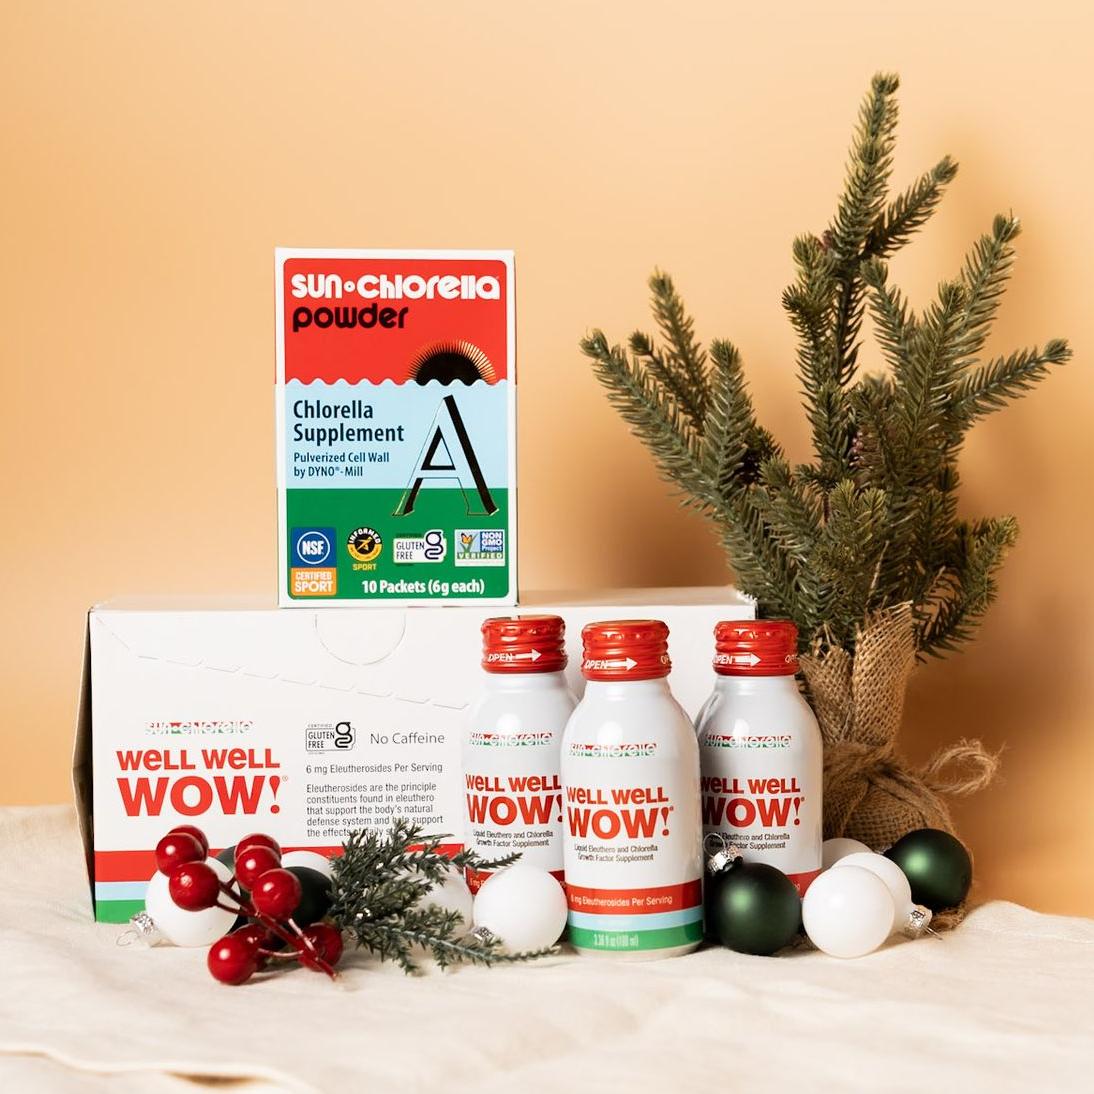 Fuel & Recover Holiday Deals: Sun Chlorella Powder 10 packets box 6 grams per packet and Well Well Wow! Drink 10 bottle box bundle